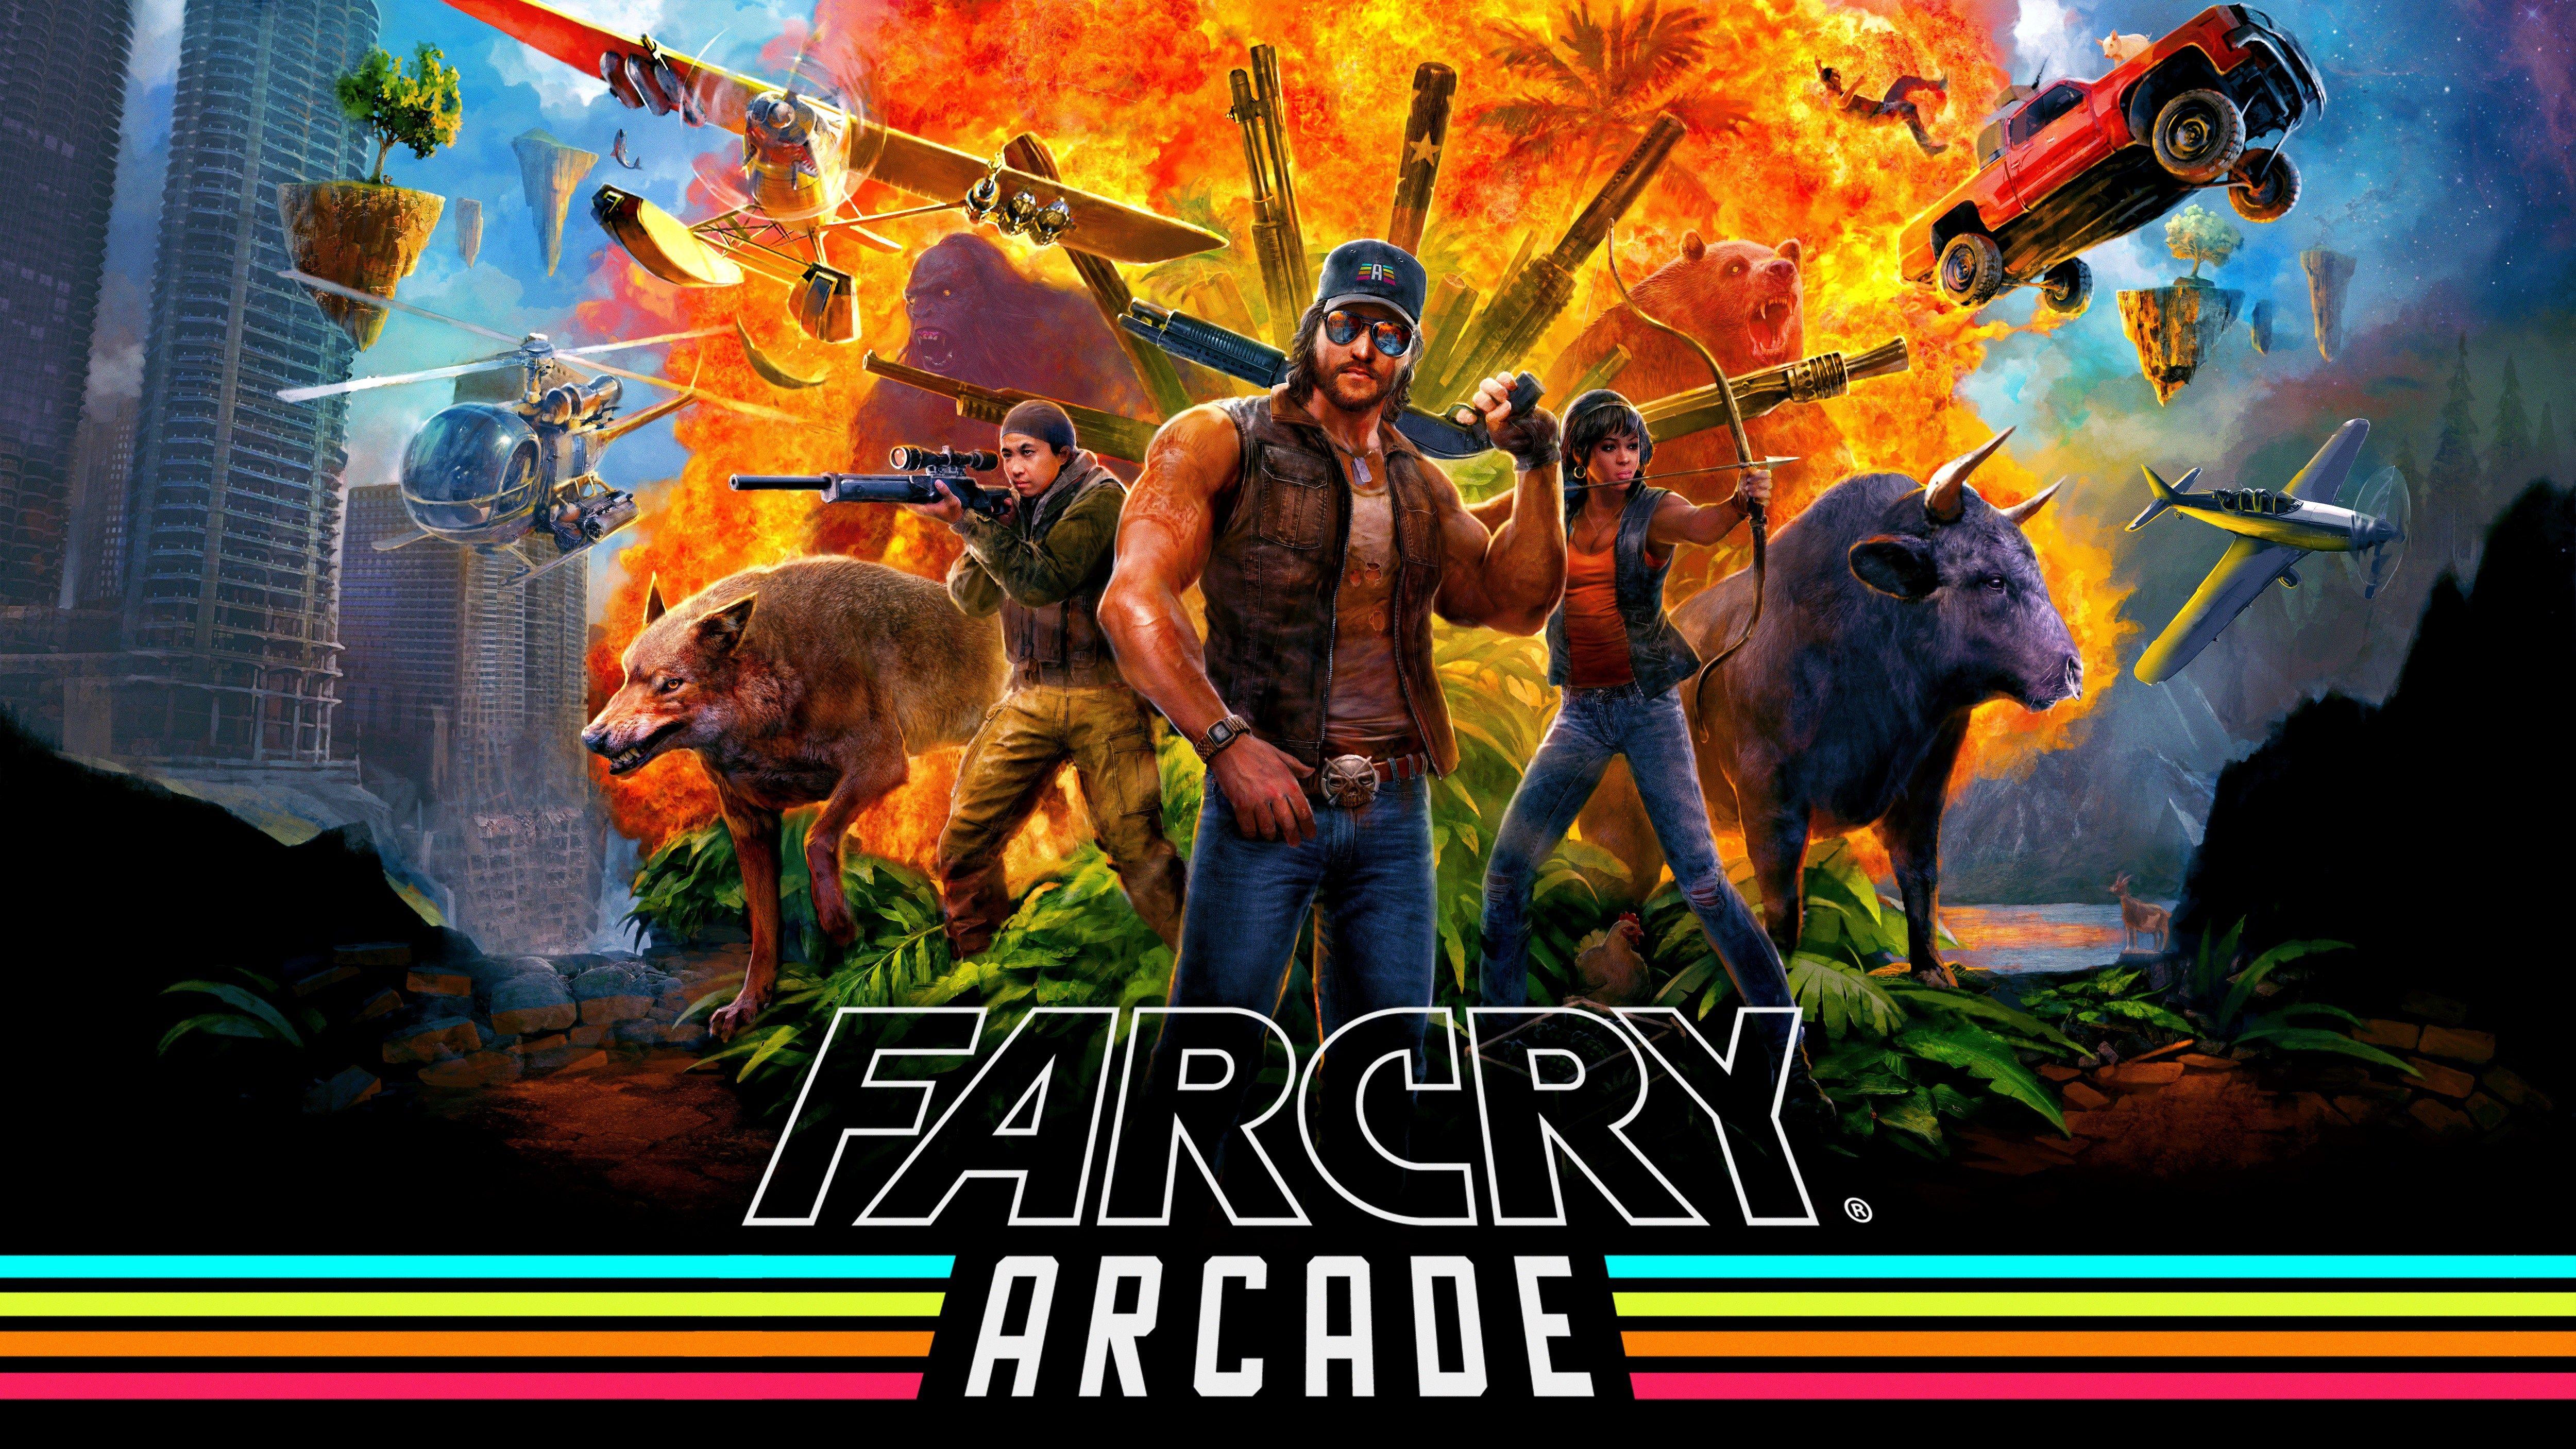 Far Cry 5 Arcade 2018, HD Games, 4k Wallpapers, Image, Backgrounds